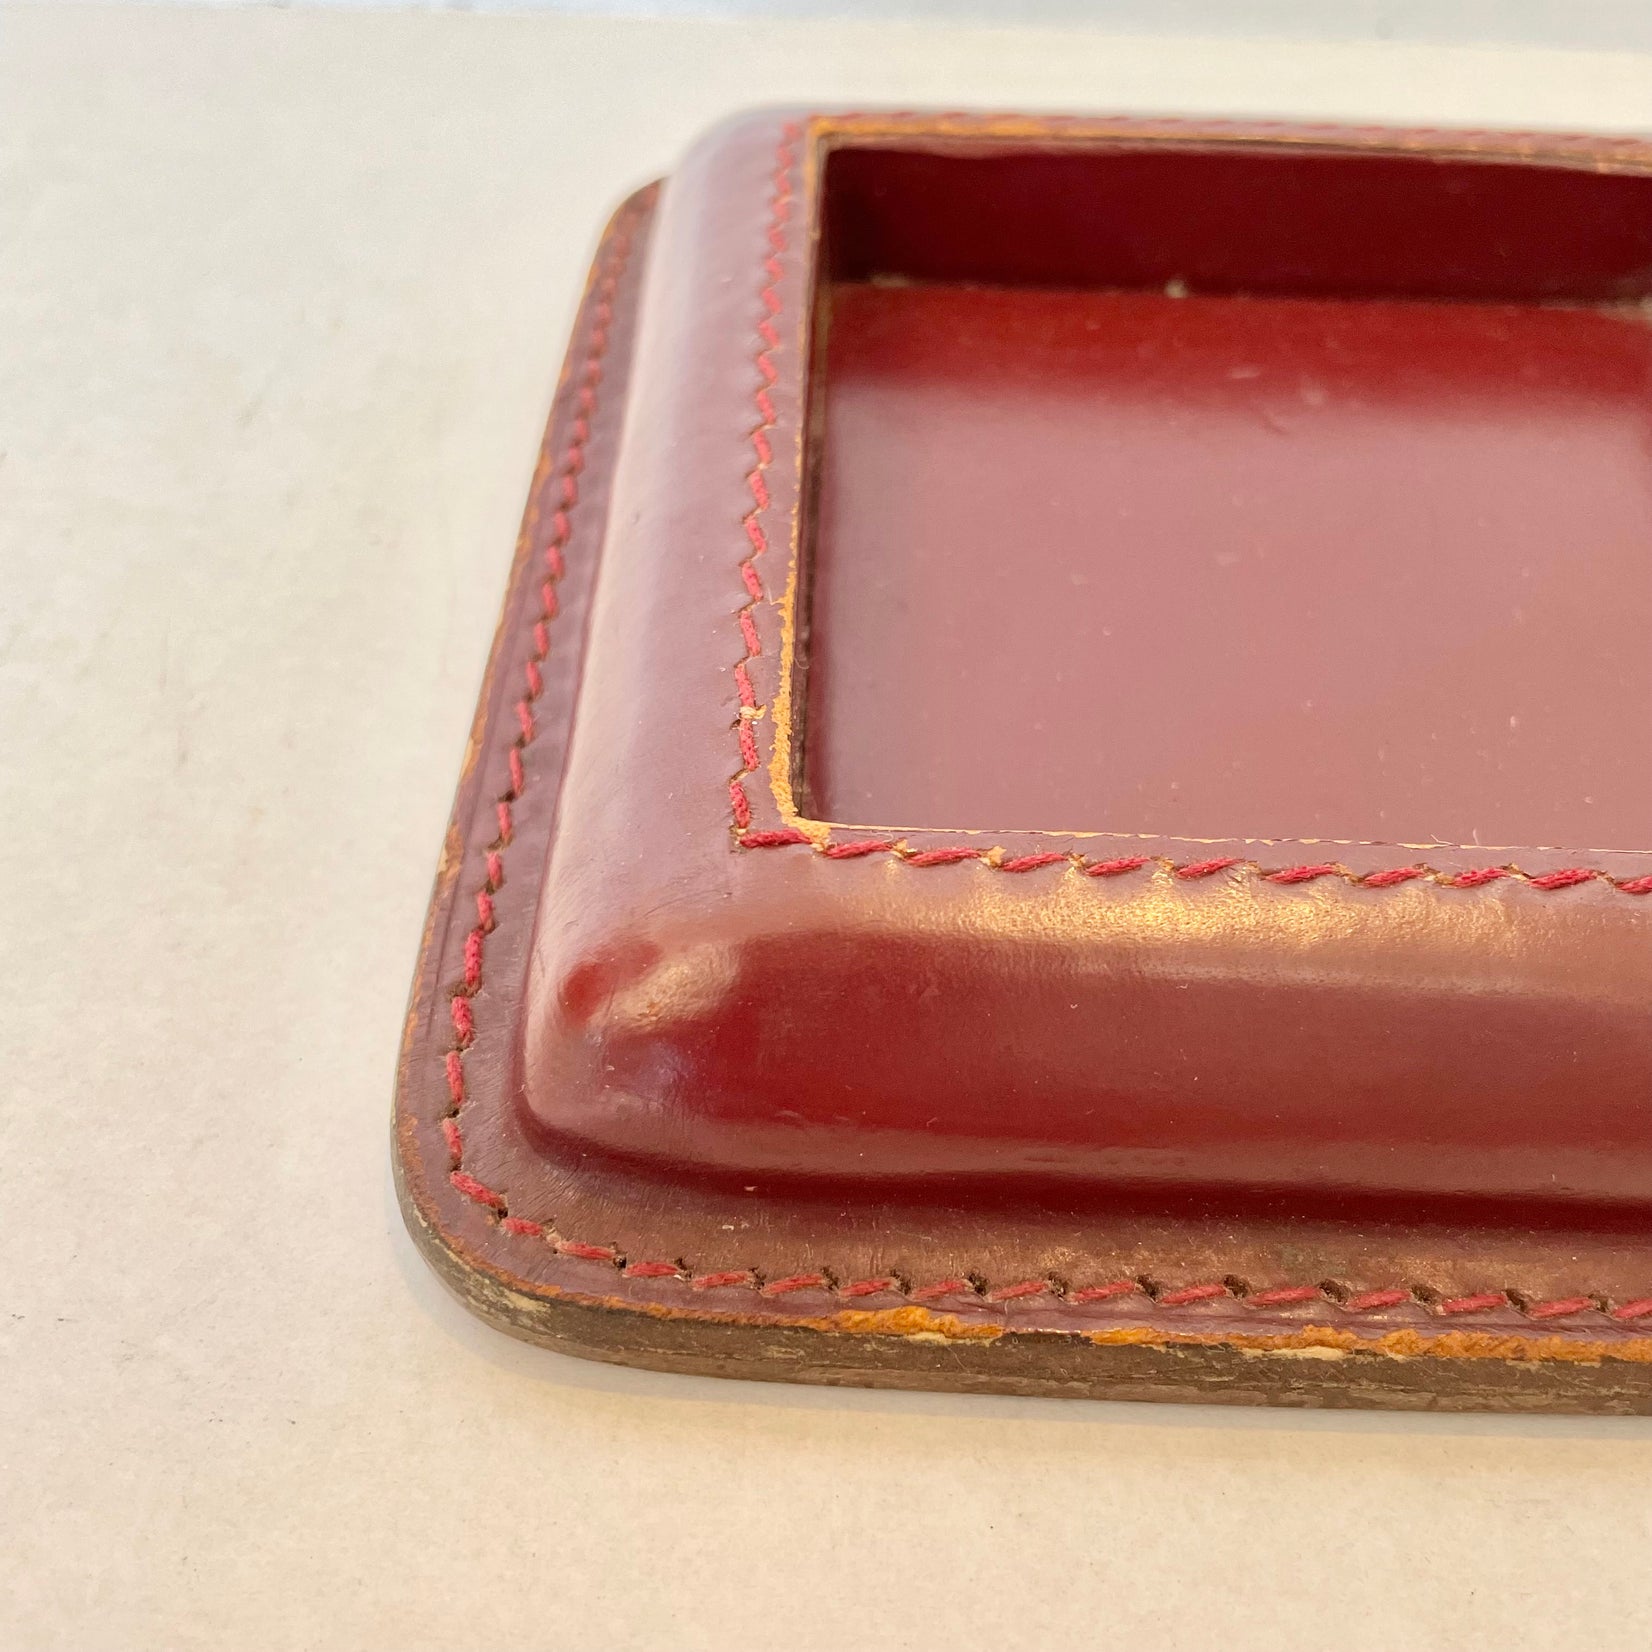 Jacques Adnet Leather and Glass Ashtray